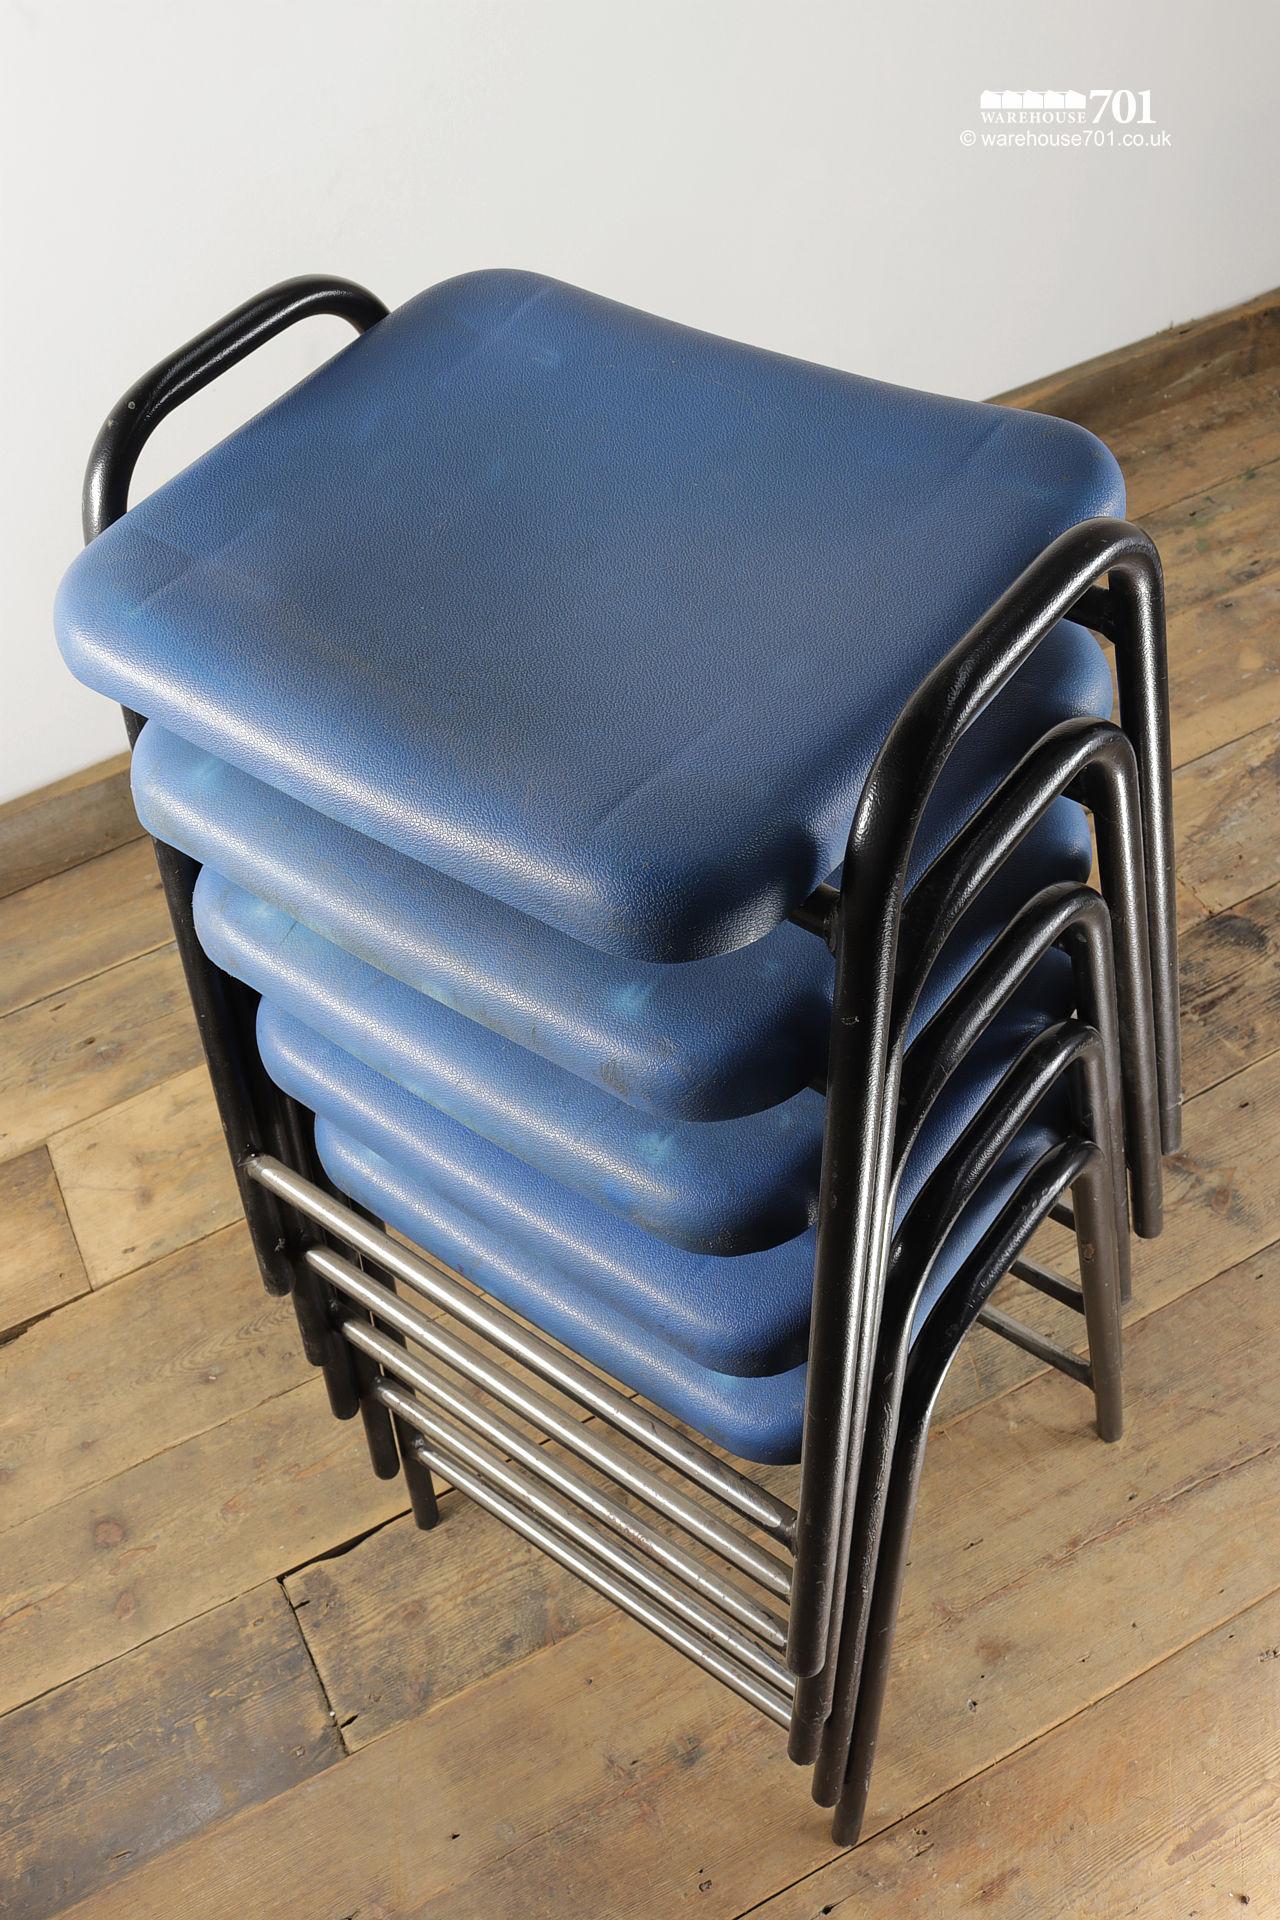 Hille Black Tubular Steel and Blue Plastic Stacking Stools #3